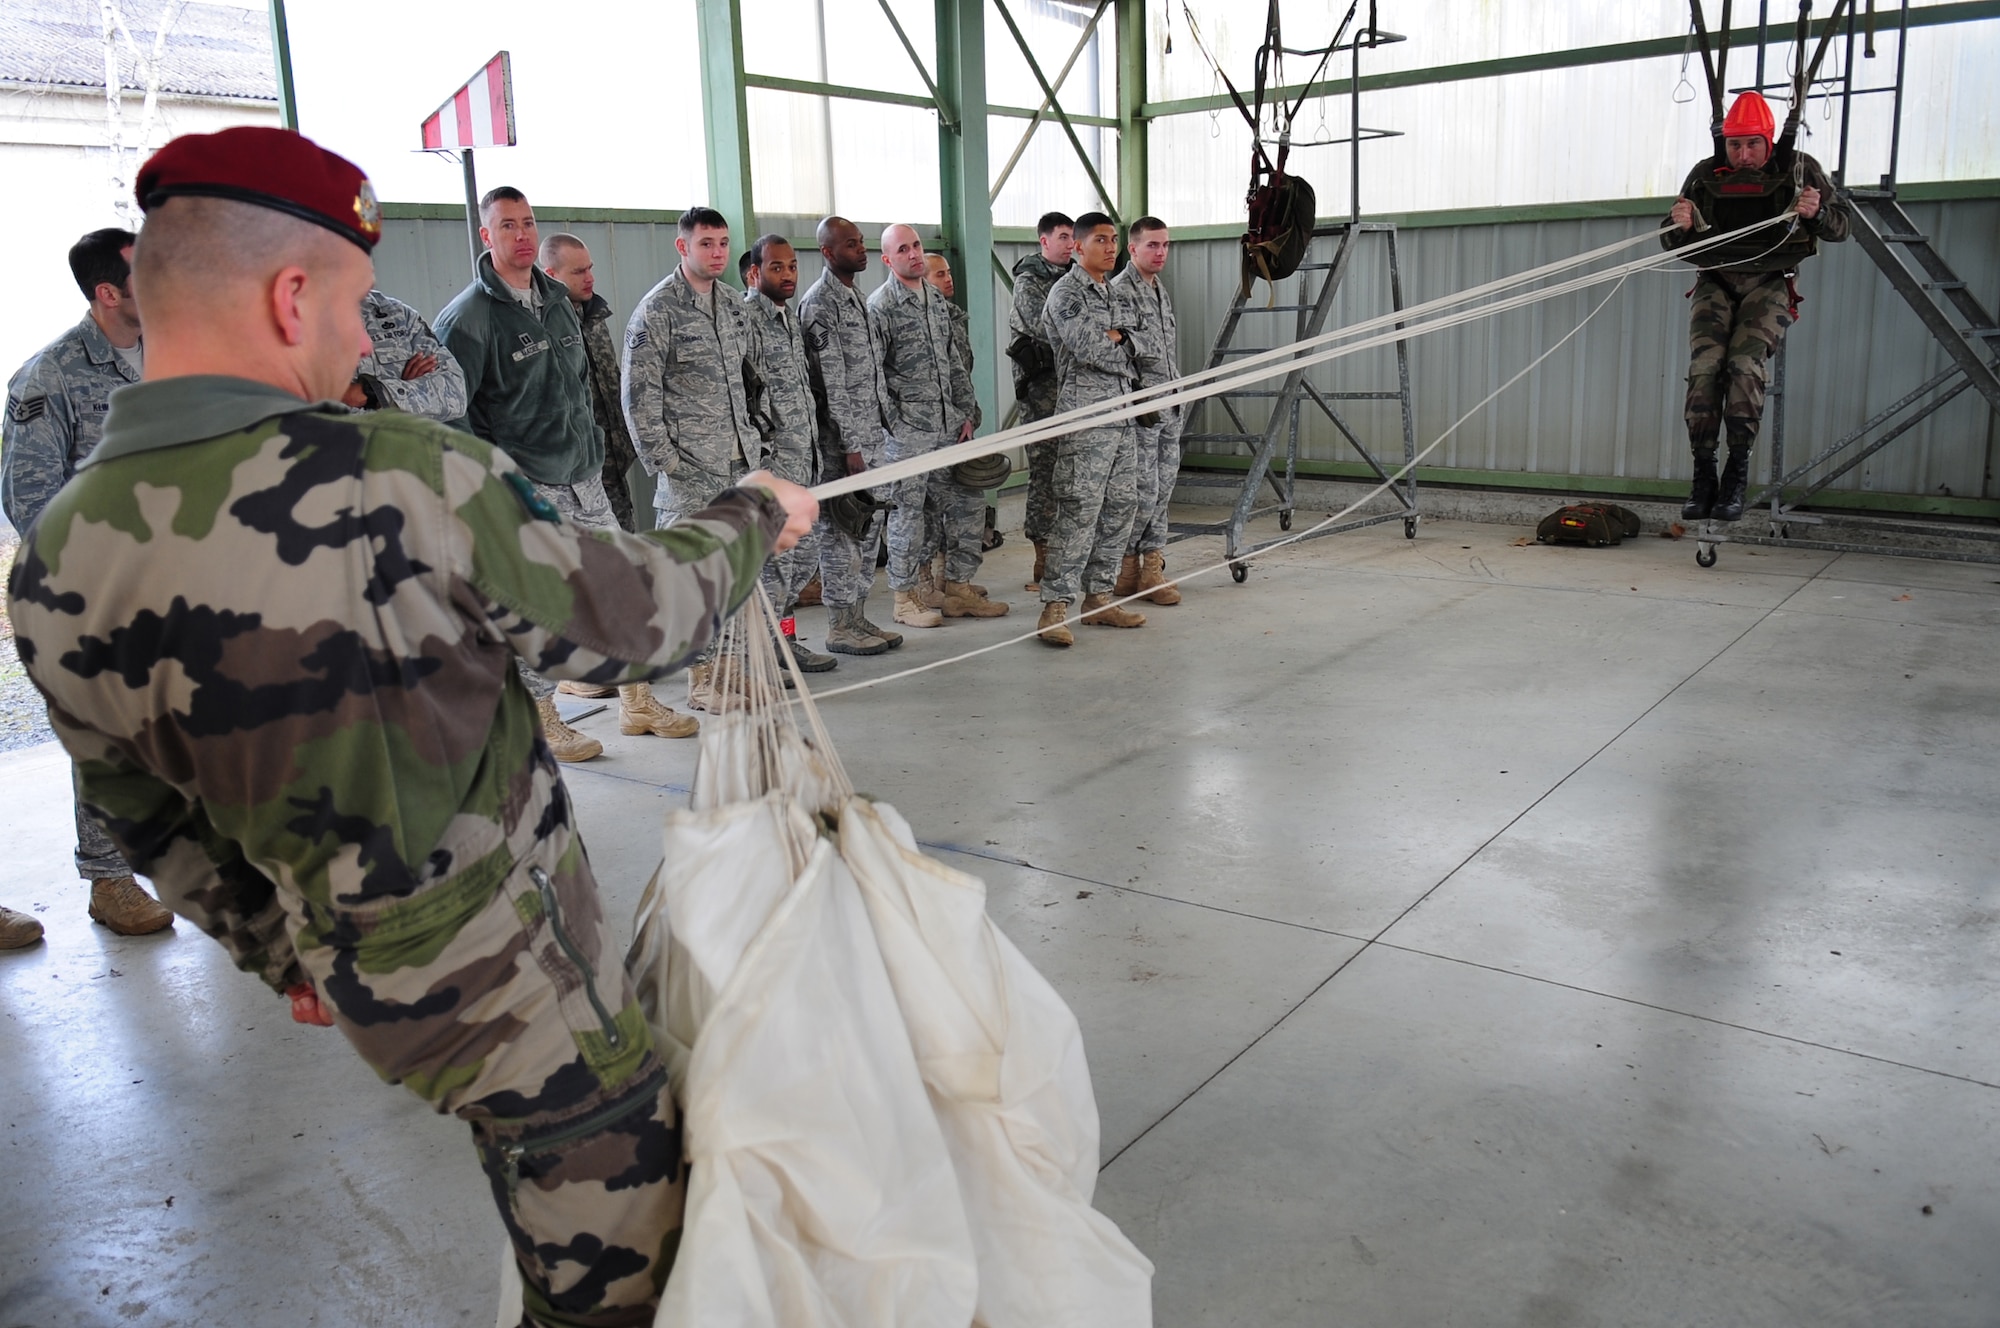 French Airborne Academy Master Sergeants Loic Neveu and Stephane Paternotte demonstrate proper procedure for paratroopers using French military equipment to members of the U.S. military before a combined nation jump, March 3, 2010.  Members of the 435th Contingency Response Group and the 5th Quartermaster Company joined with their French military counterparts for a week of training at the École des troupes aéroportées (ETAP), or School of Airborne Troops, a military school dedicated to training the military paratroopers   of the French army, located in the town of Pau, in the département of Pyrénées-Atlantiques, France.  The ETAP is responsible for training paratroopers, and for international cooperation and promotion of paratroop culture. (U.S. Air Force Photo by Staff Sgt. Jocelyn Rich)